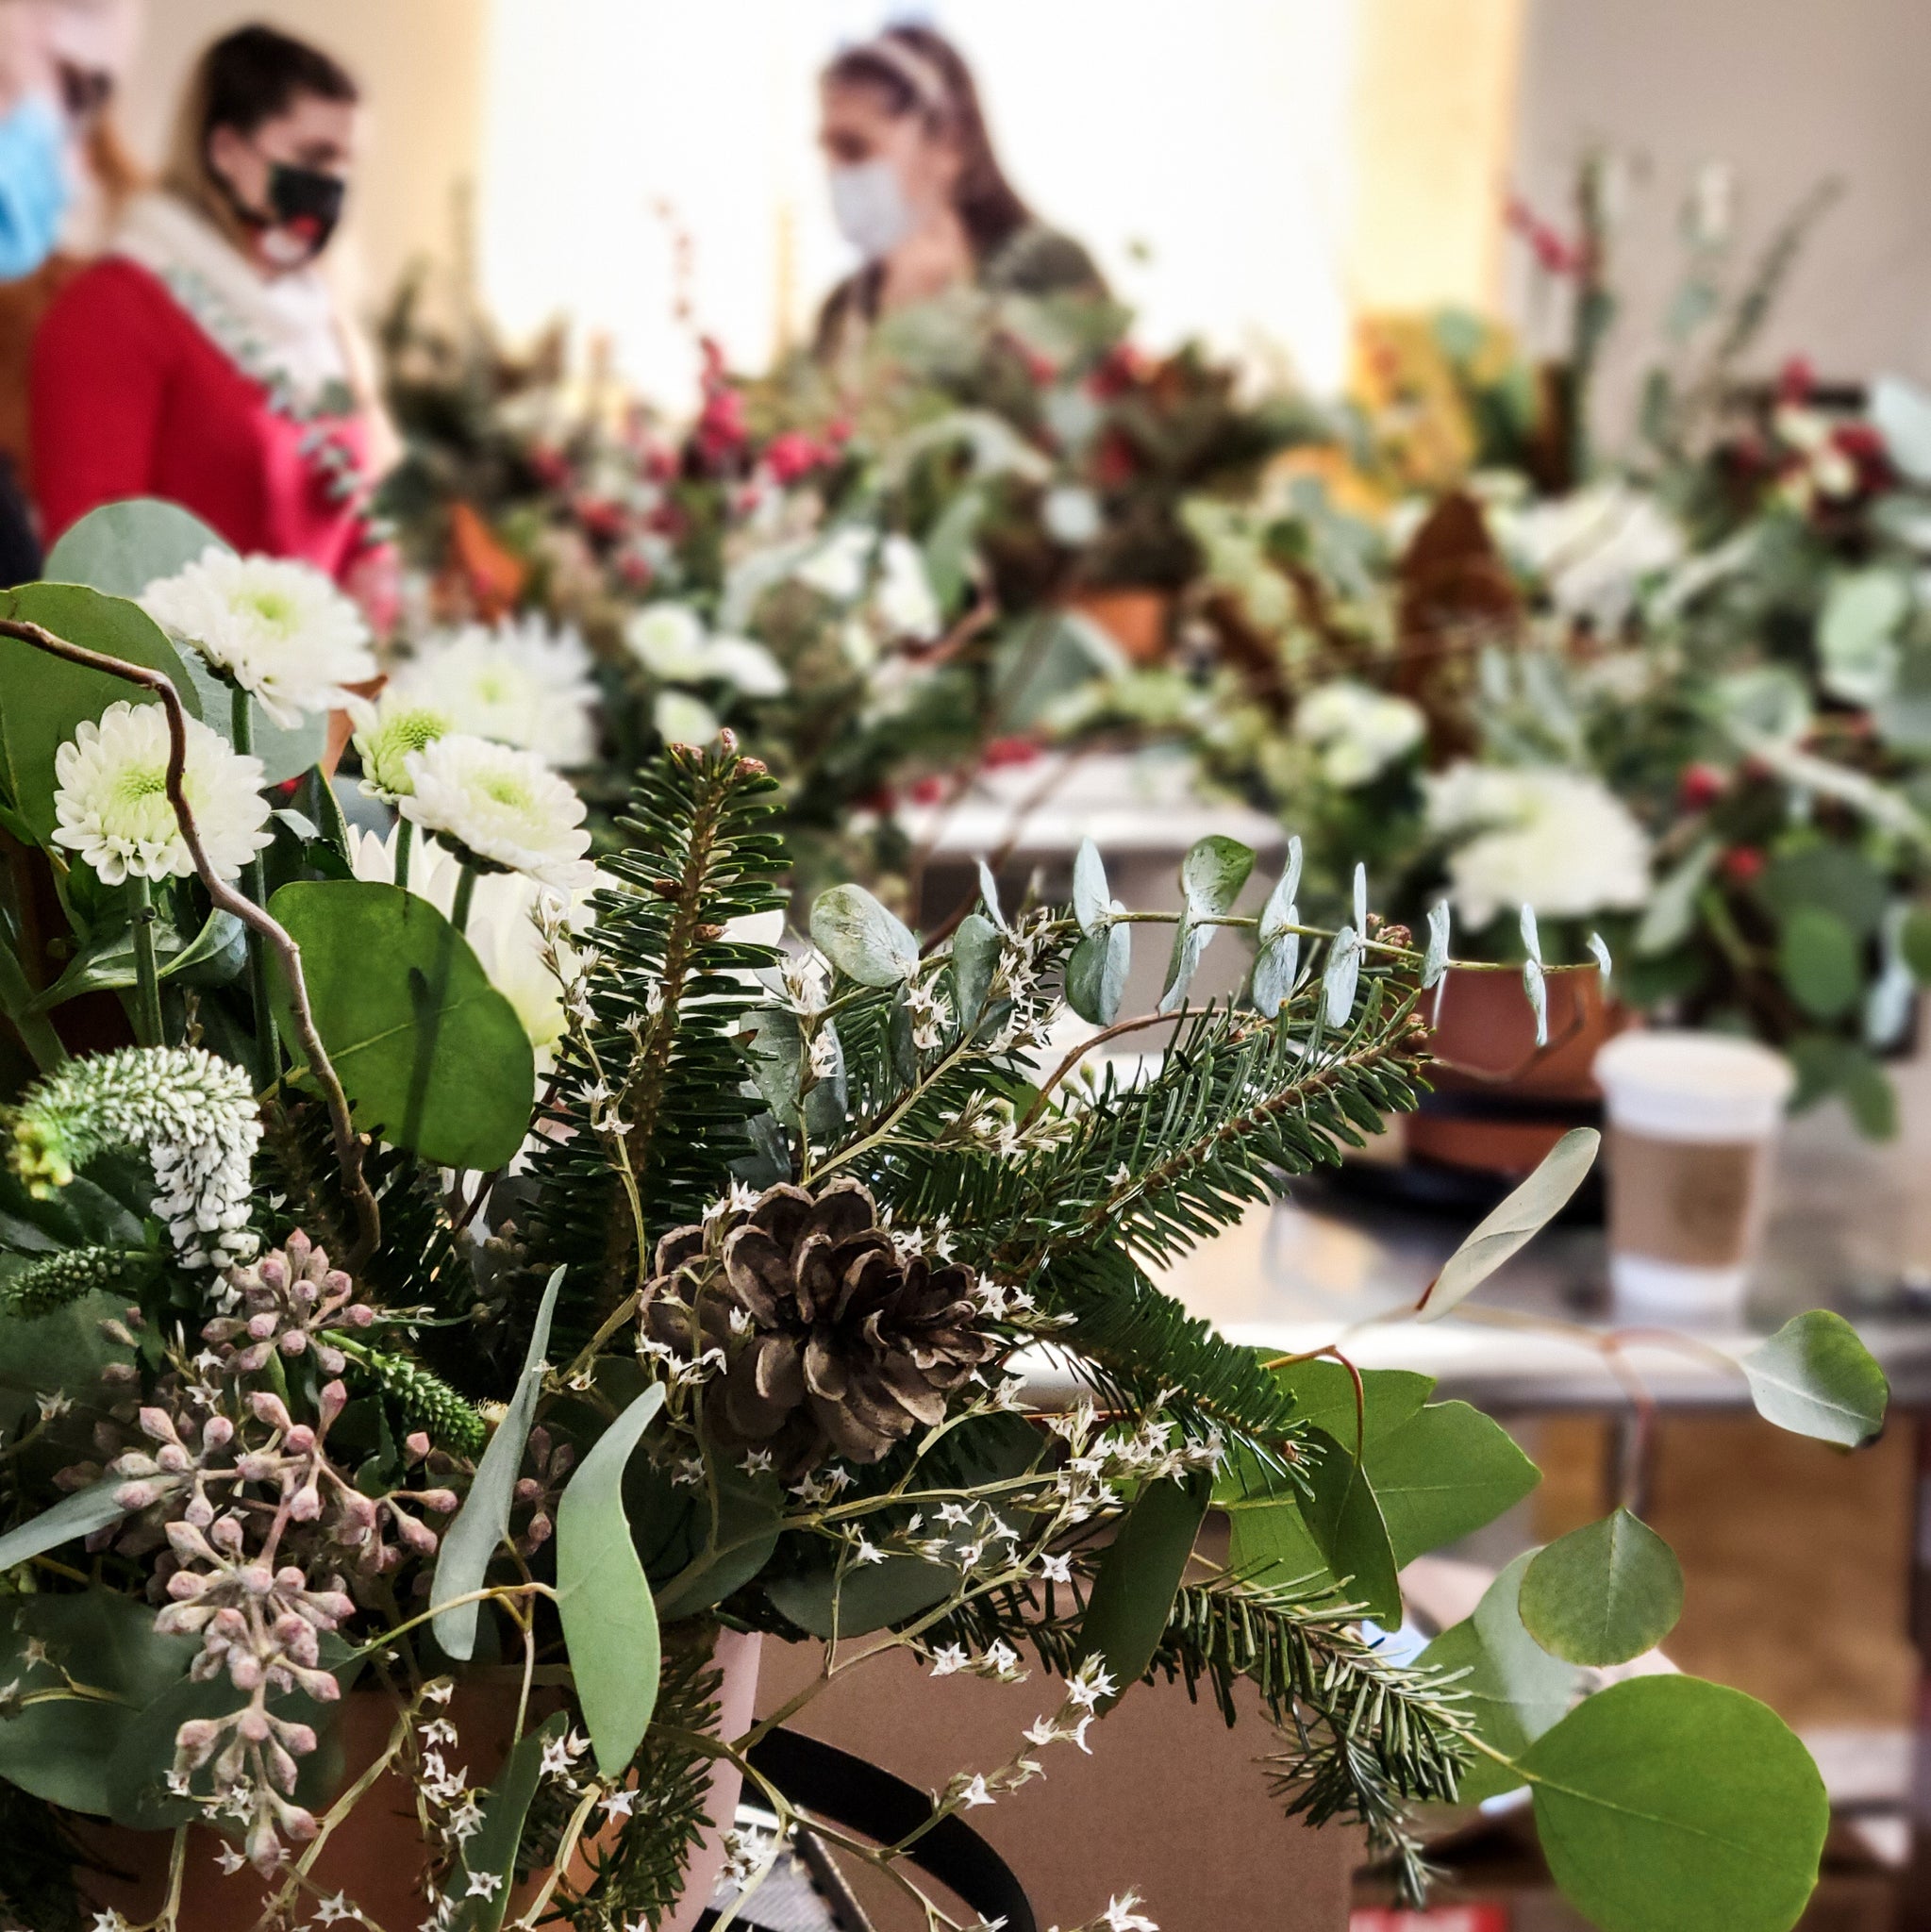 Holiday Tour: Christmas Centerpiece Workshop at The Makery 12/19